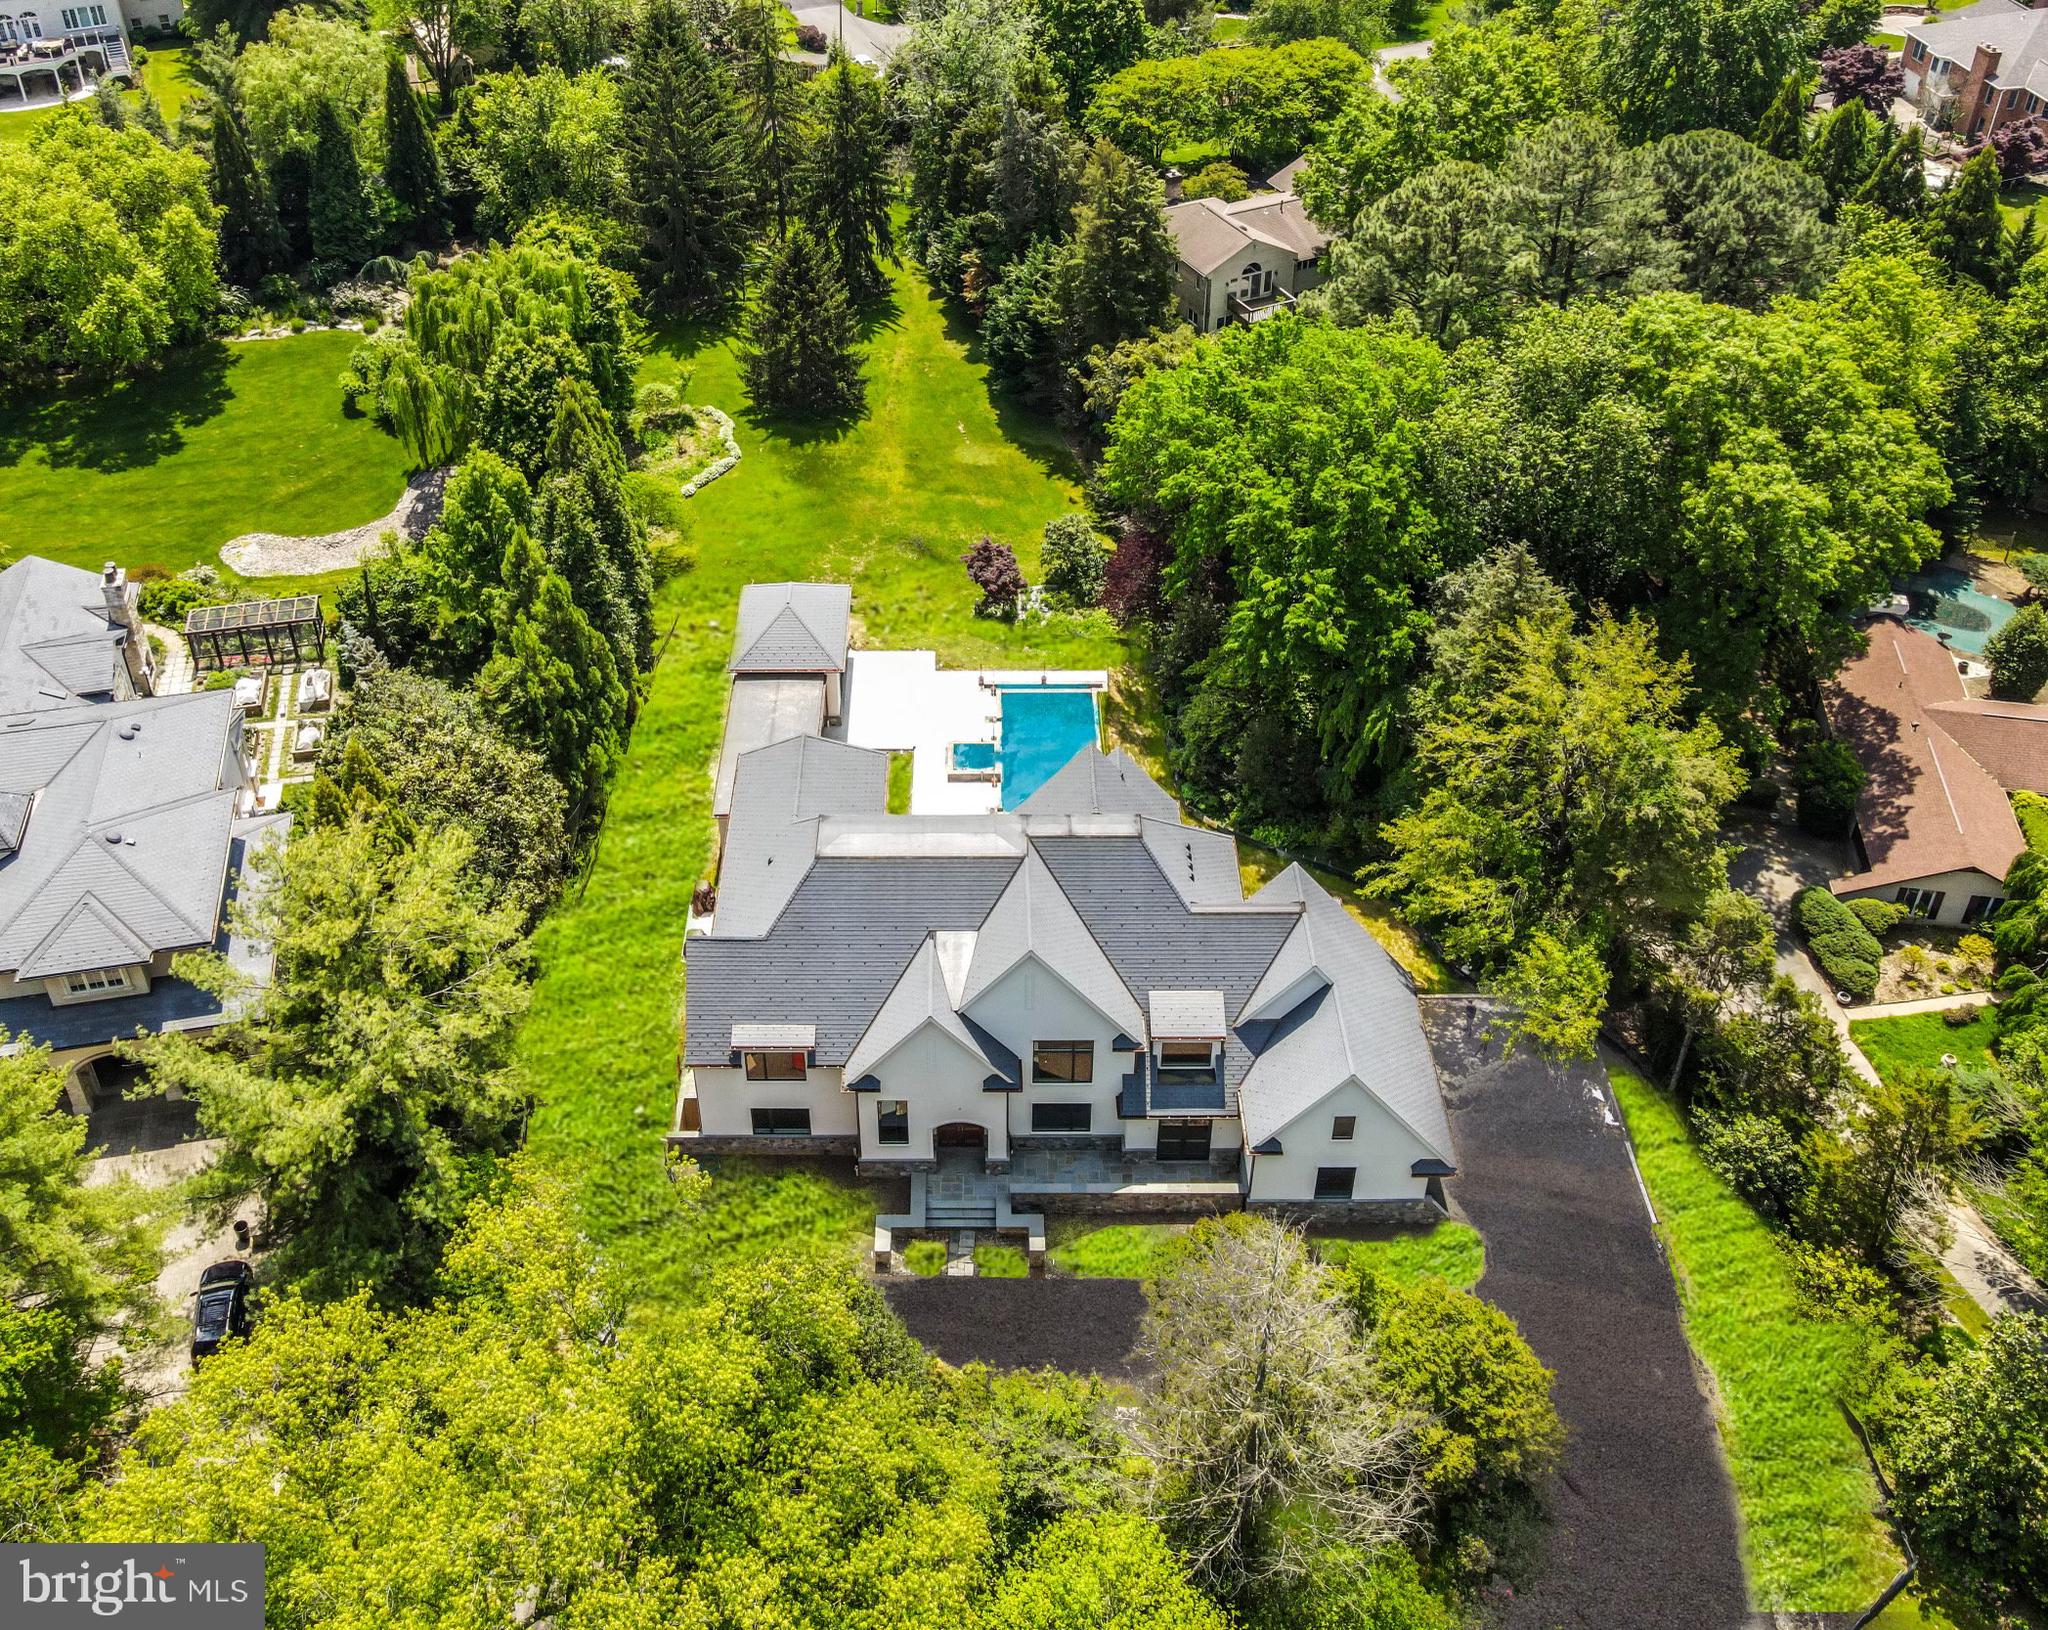 an aerial view of a house with swimming pool a yard and outdoor seating